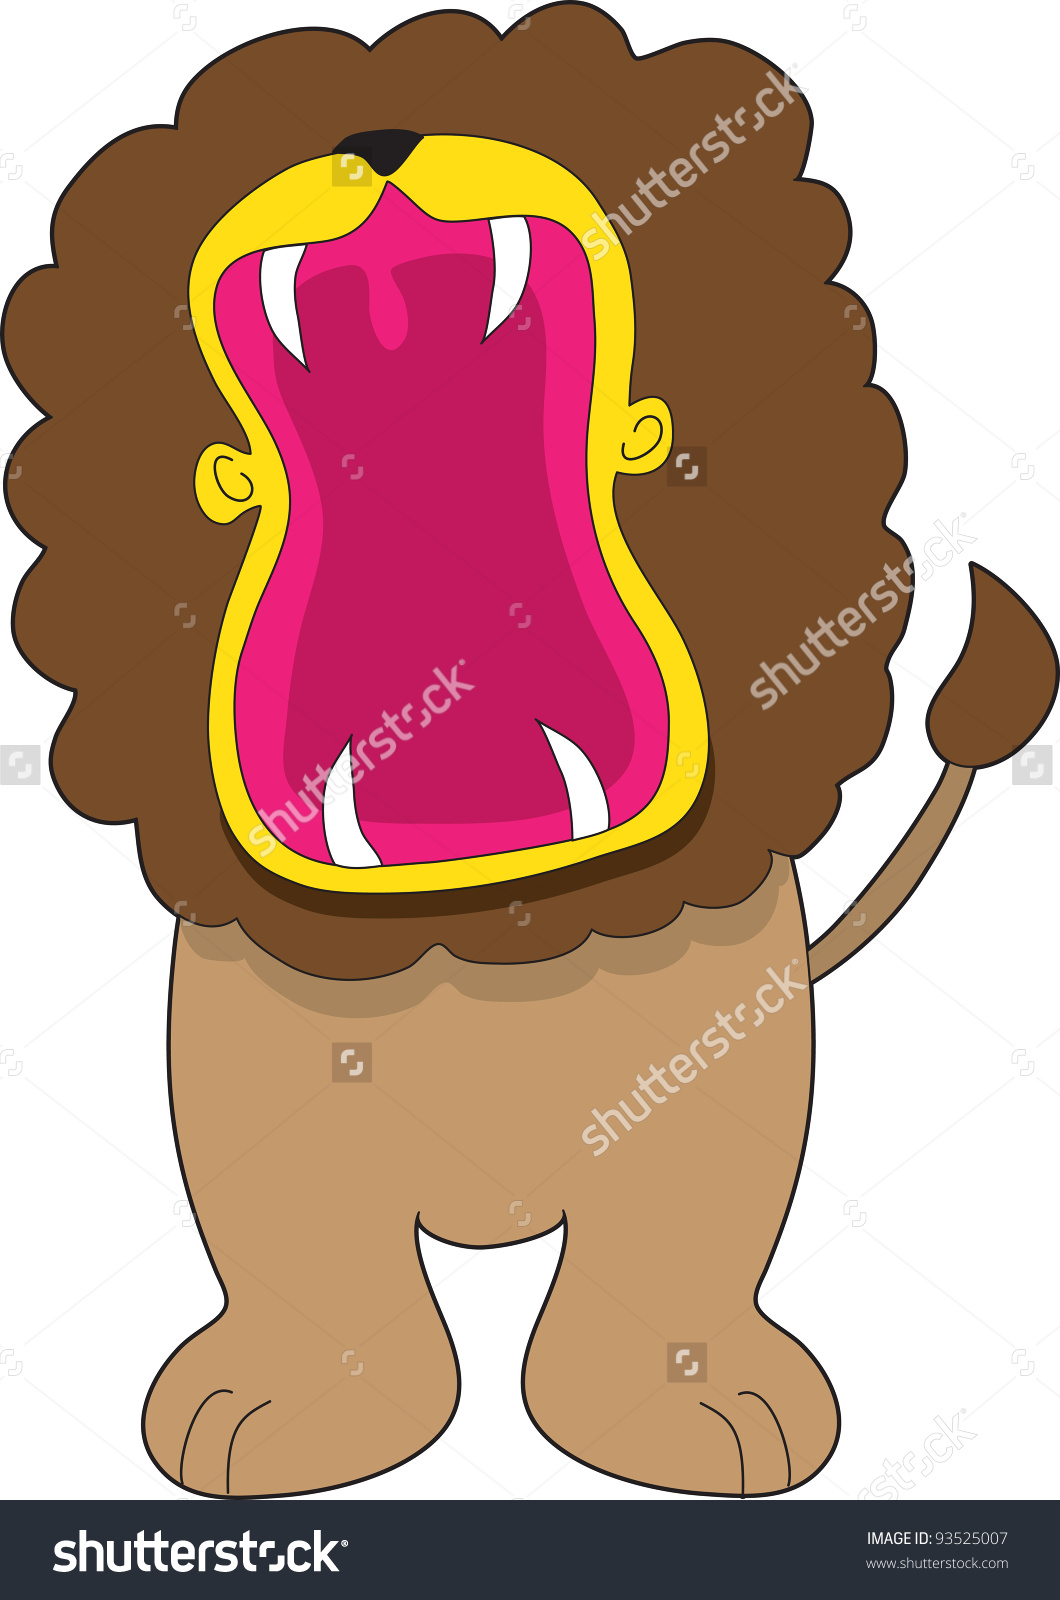 Lion roaring mouth clipart.